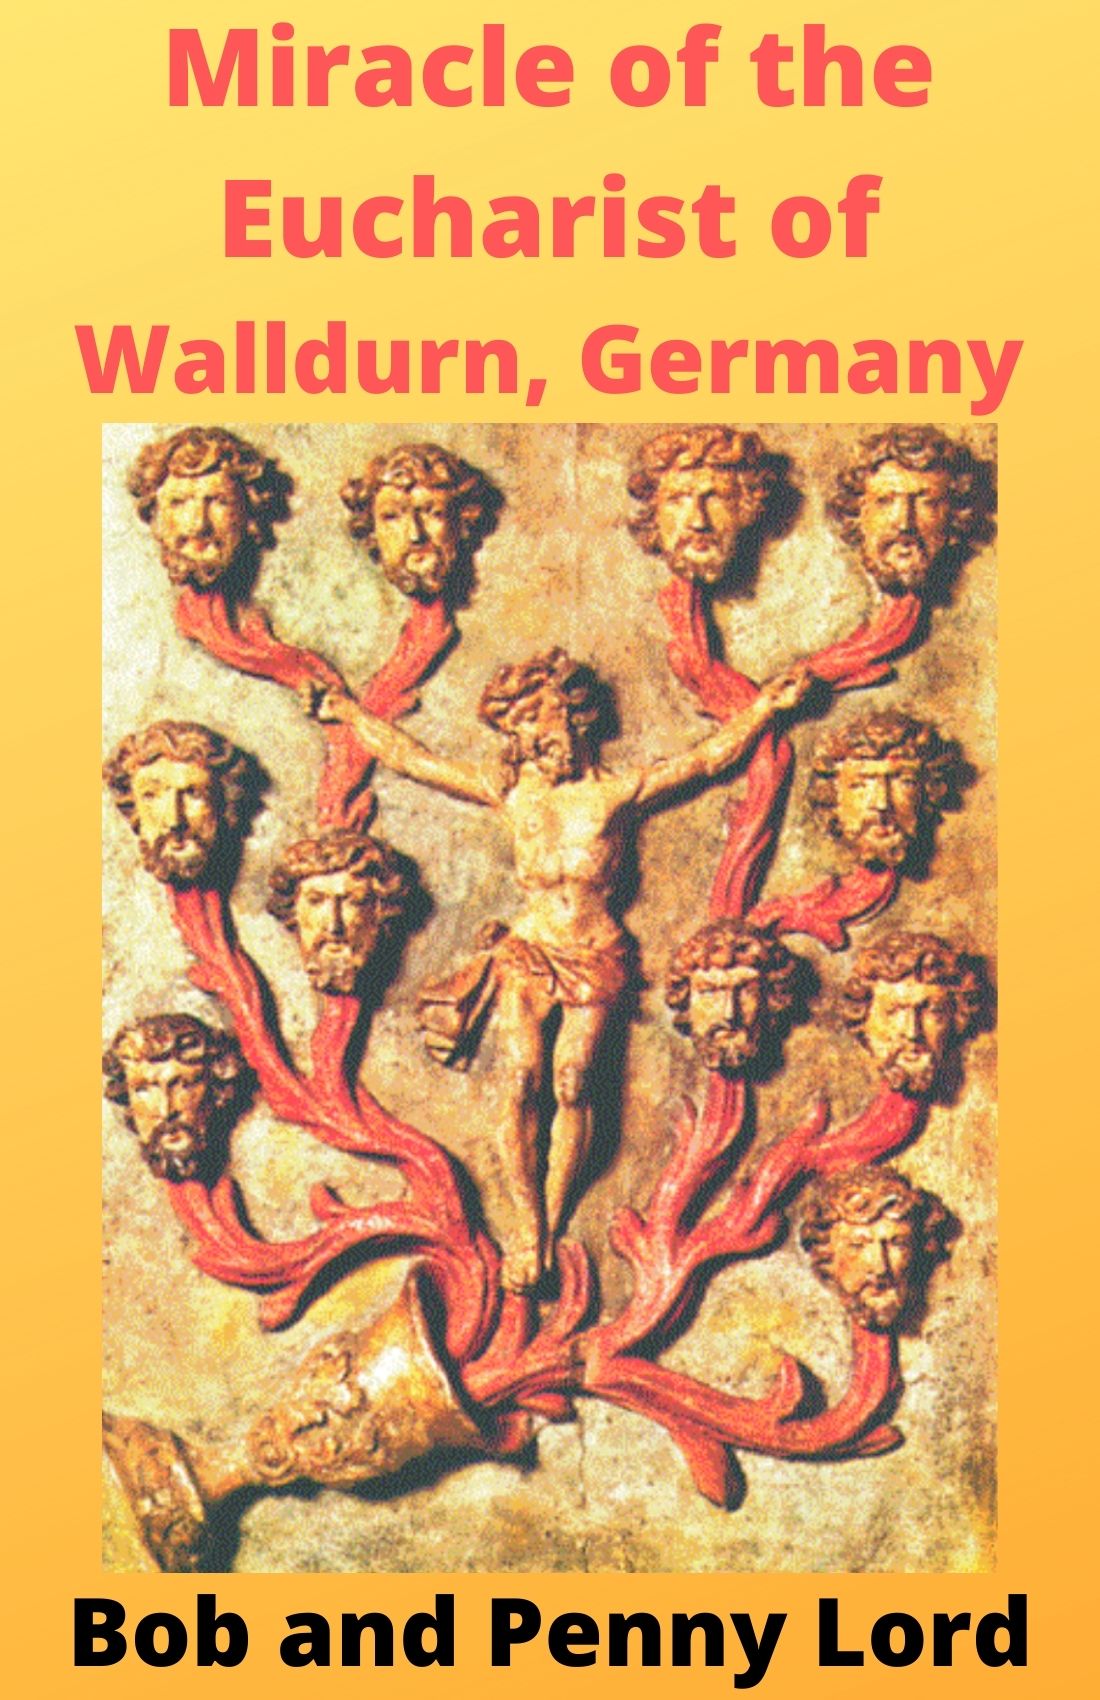 Miracle of the Eucharist of Walldurn, Germany  DVD - Bob and Penny Lord